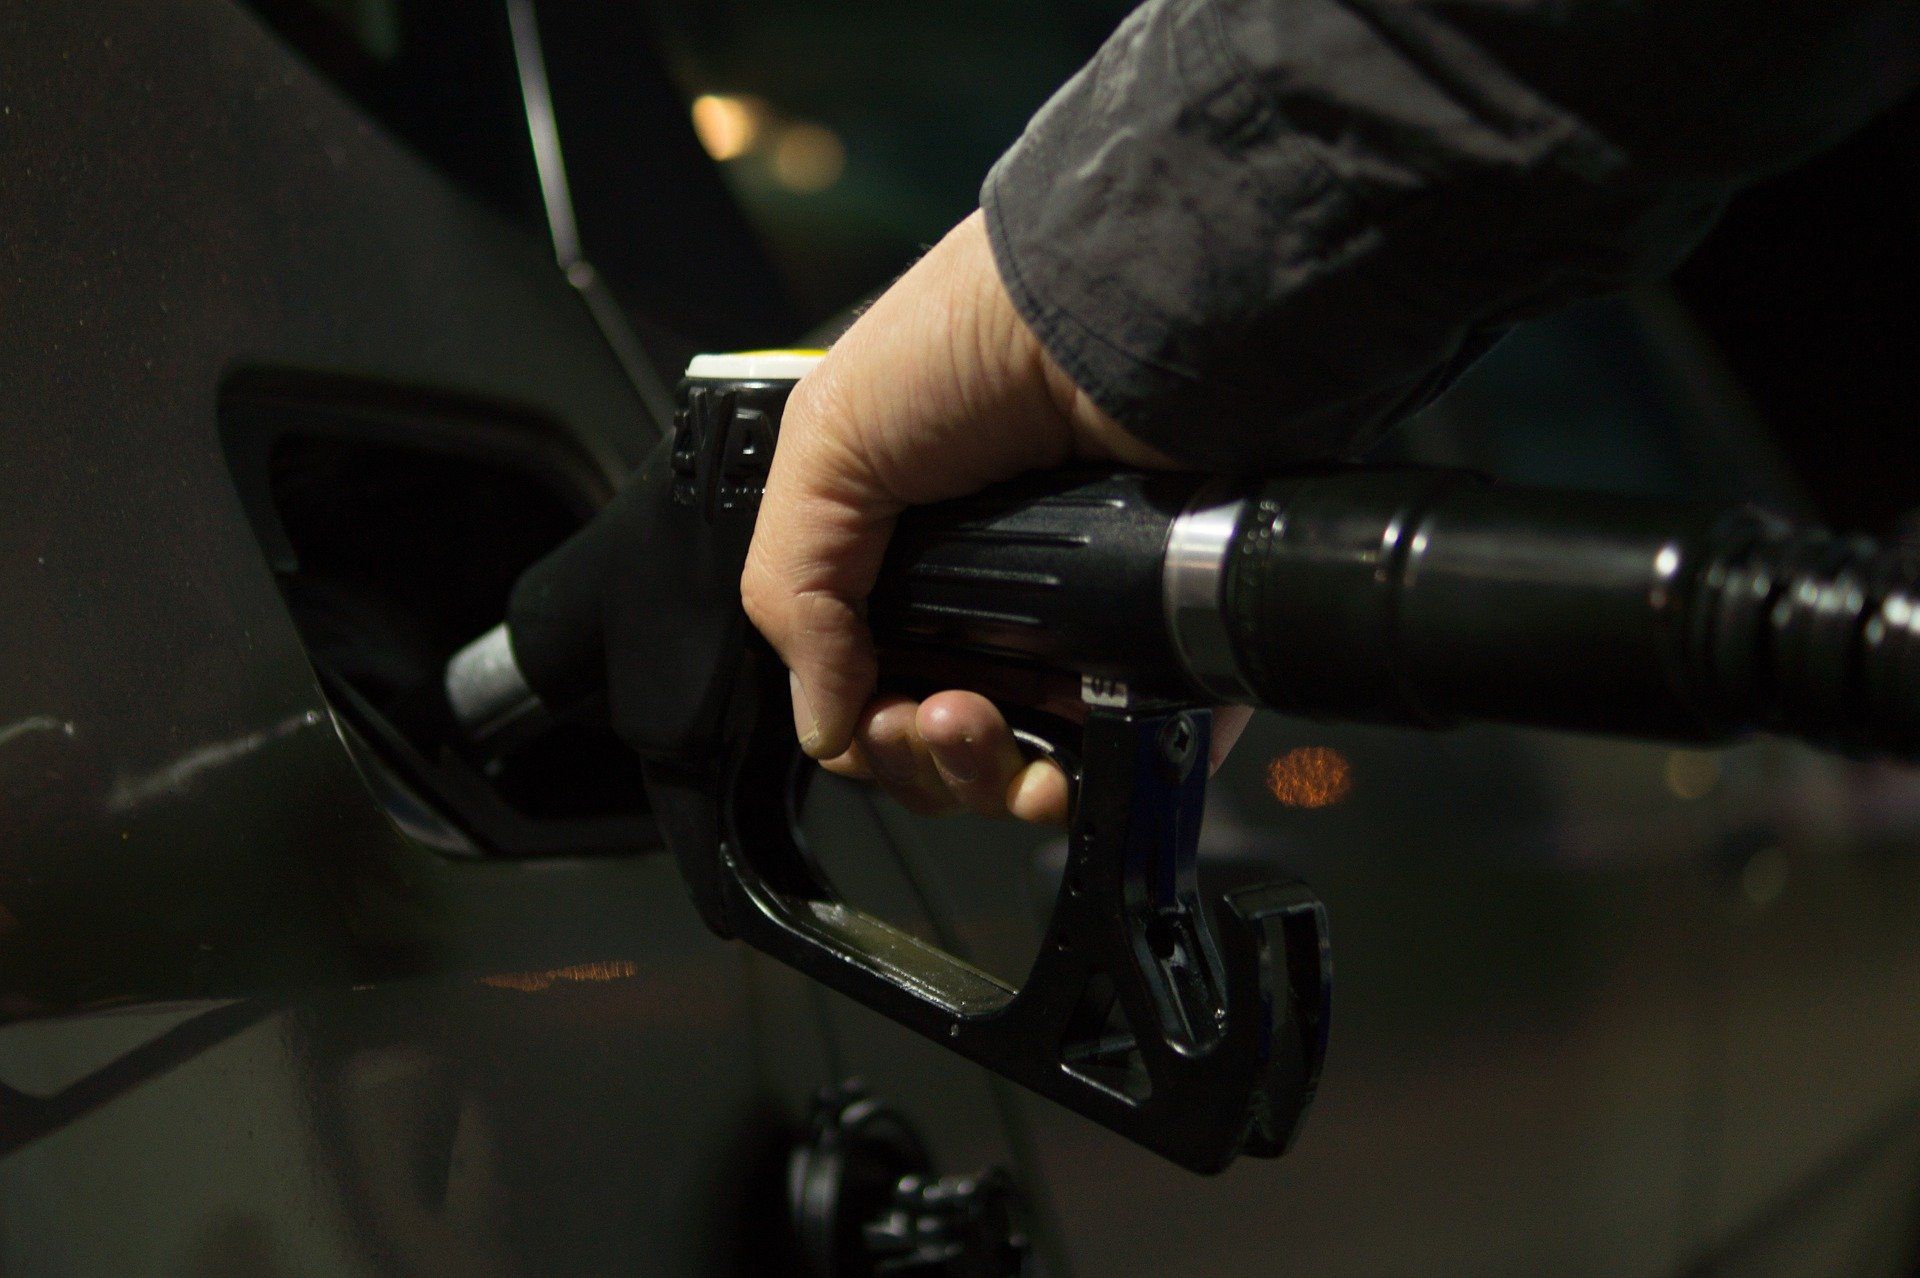 Fuel Price today: Petrol priced at Rs 95.41, diesel Rs 86.67 in Delhi on December 30